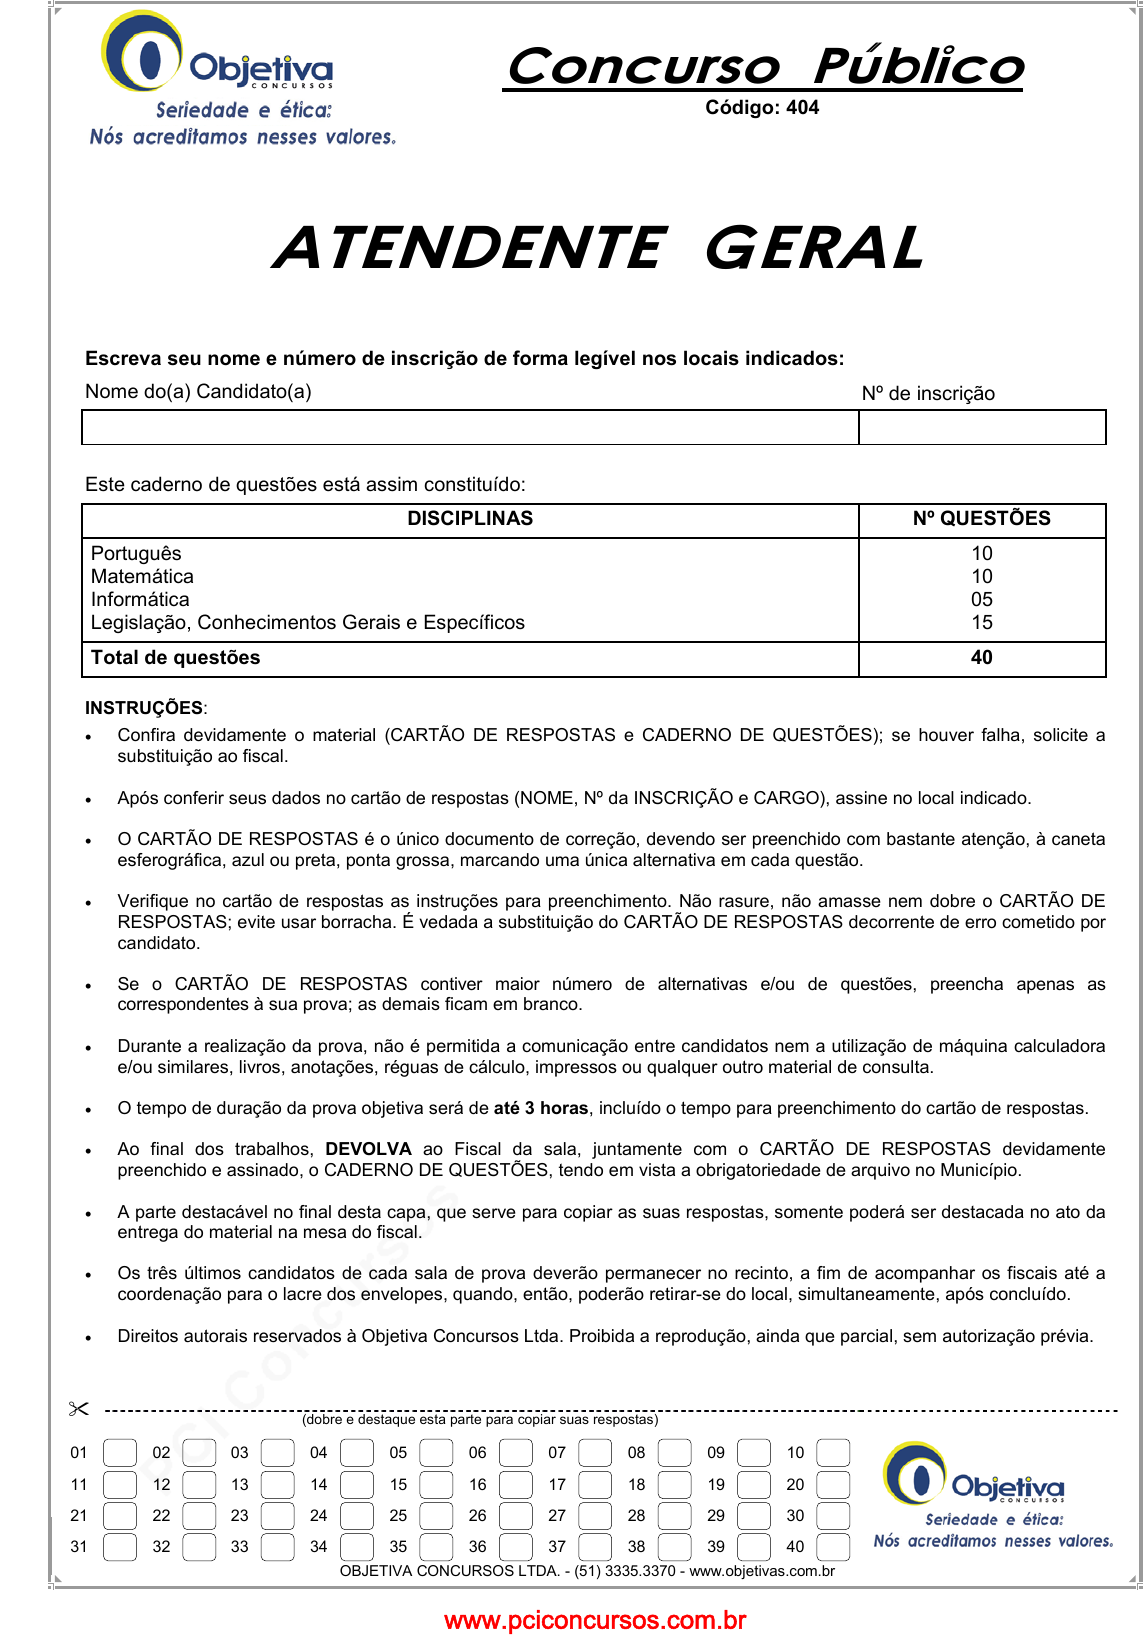 Geral, Atendentes